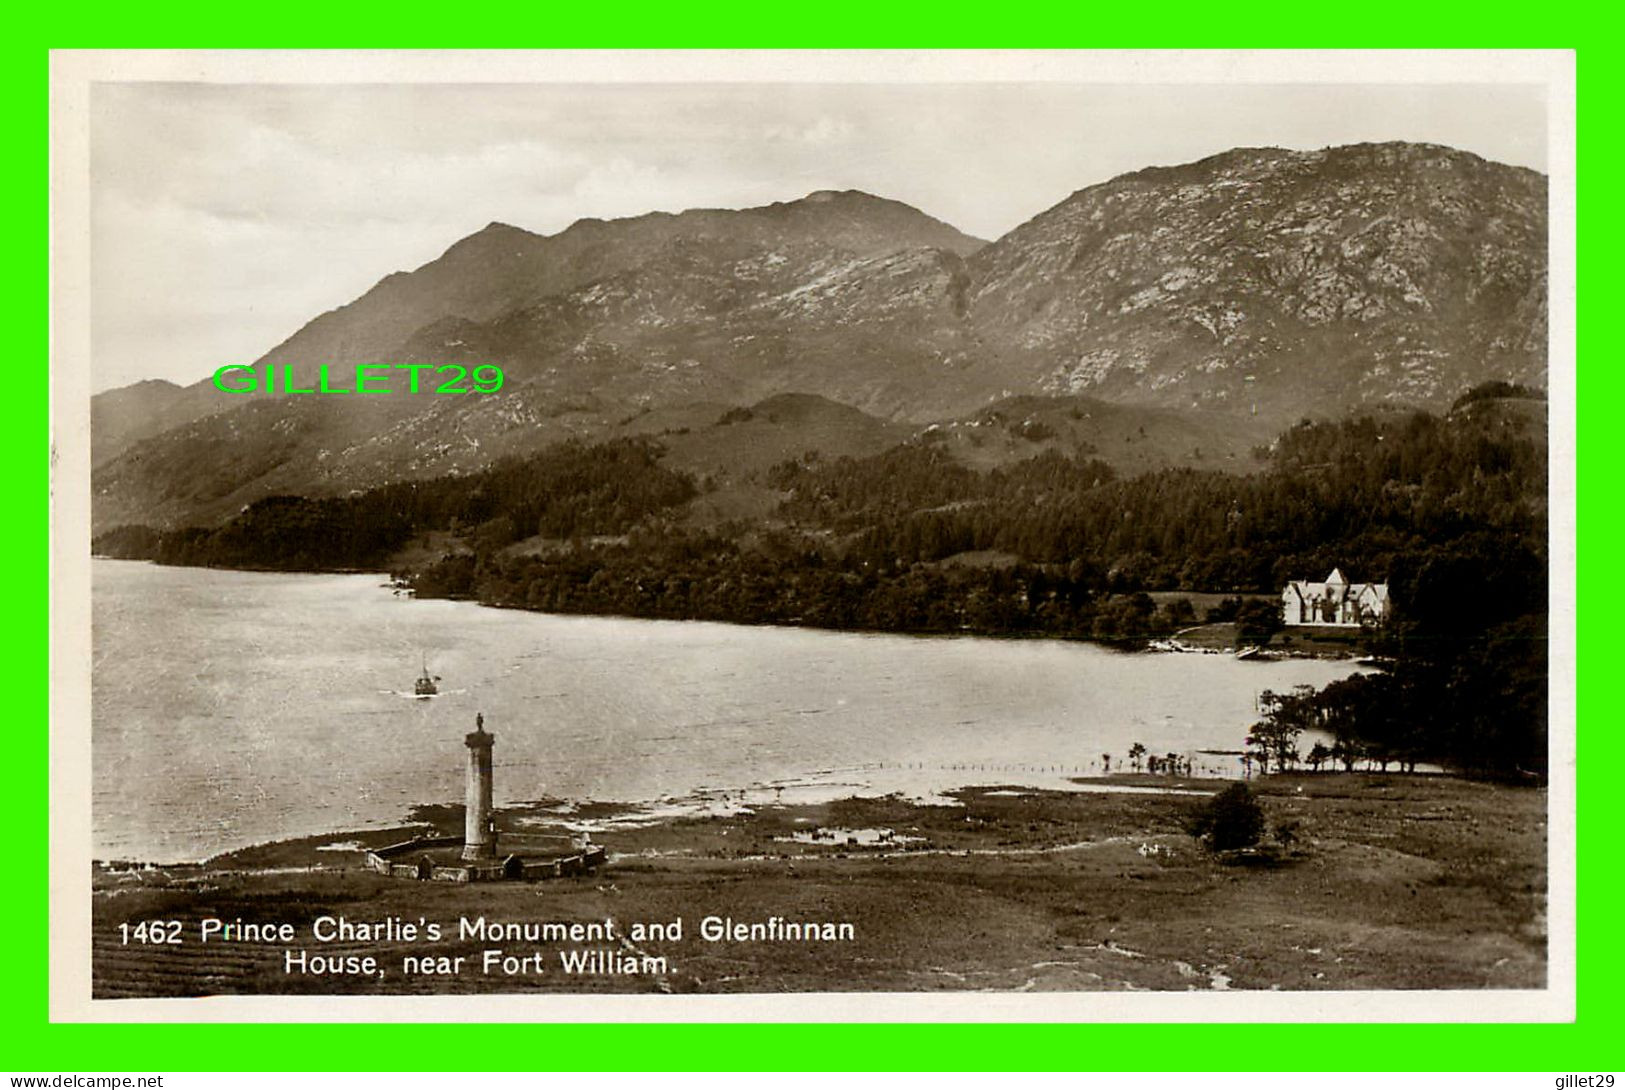 FORT WILLIAM, SCOTLAND - PRINCE CHARLIE'S MONUMENT AND GLENFINNAN HOUSE - REAL PHOTOGRAPH - - Inverness-shire